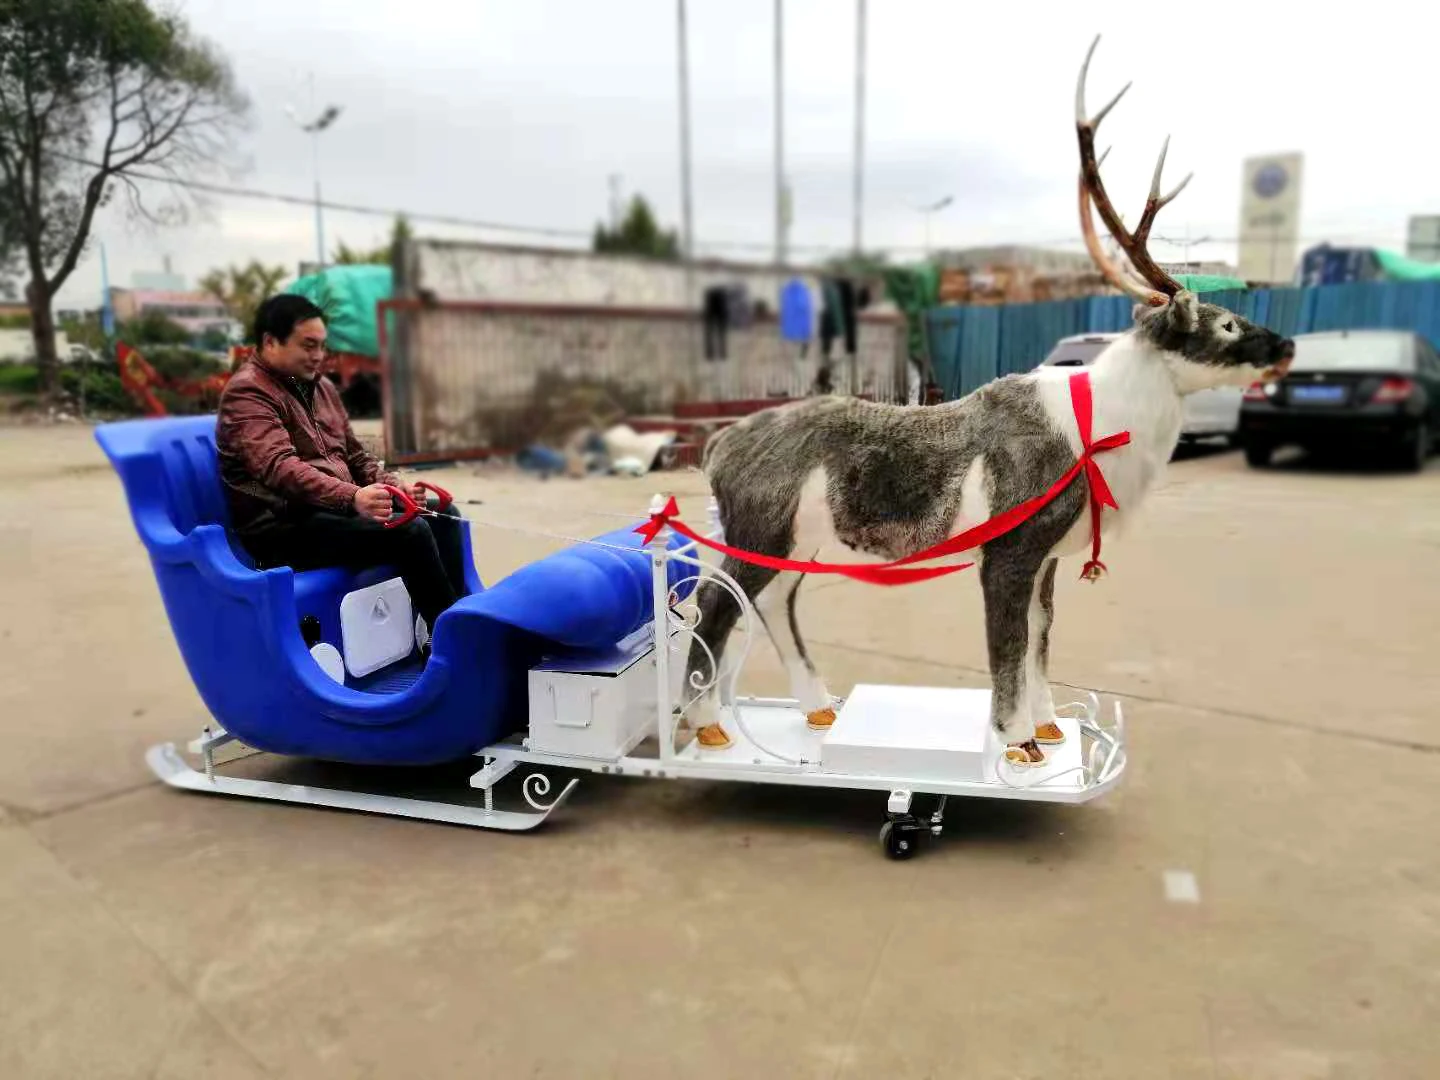 New Design Deer Sled Electric Car Buy Electric Car,Deer Sled Electric